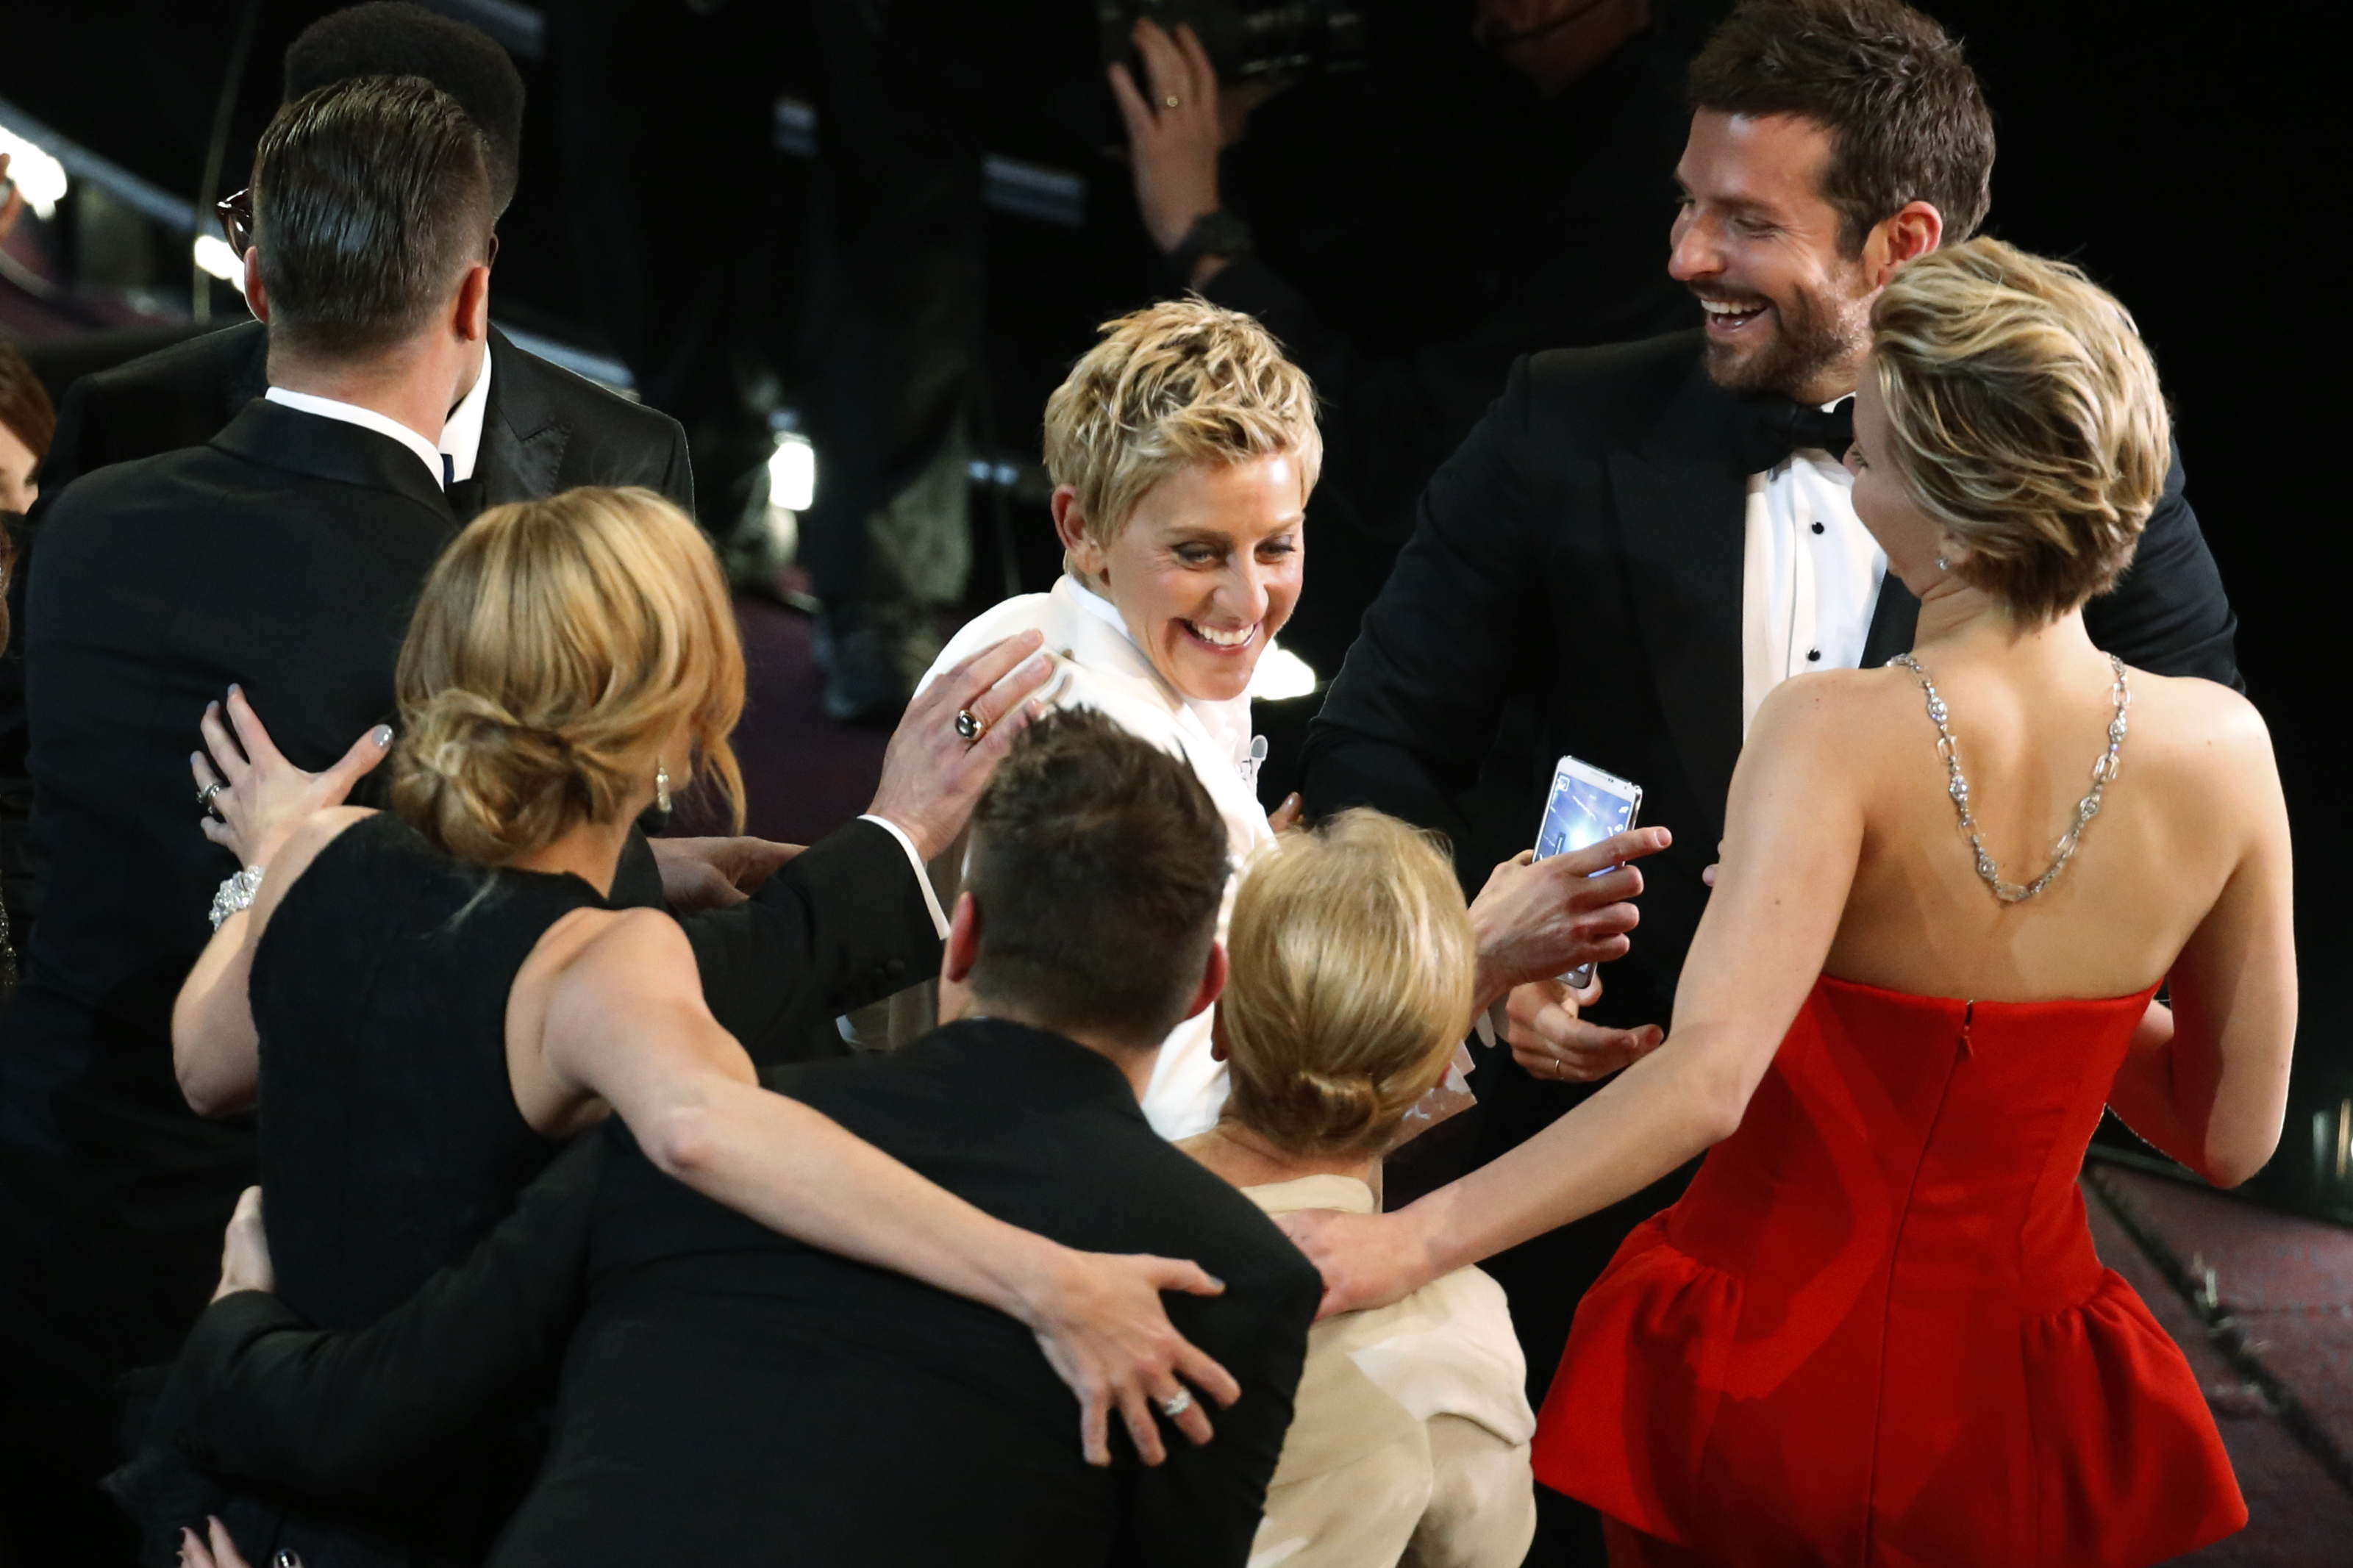 Host Ellen DeGeneres shares a laugh with Oscar nominees after taking a group "selfie" during the 86th Annual Academy Awards. (Robert Gauthier—Getty/LA Times)